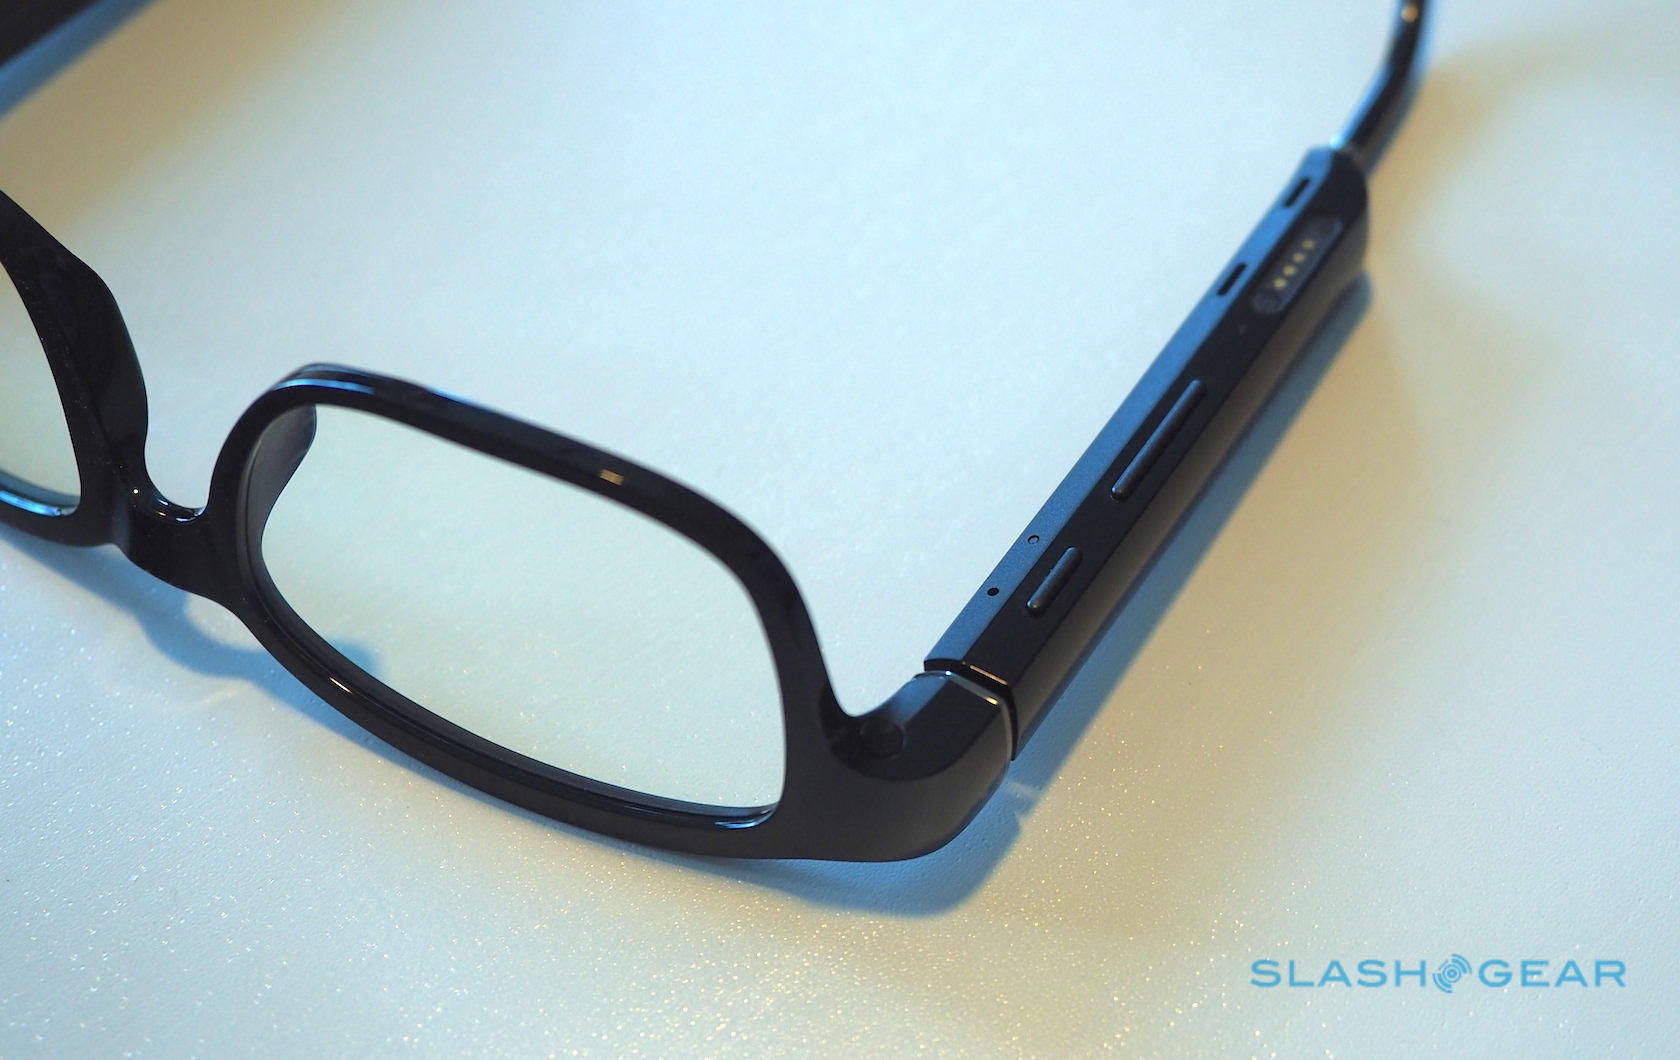 Smart glasses are back: What's new this 